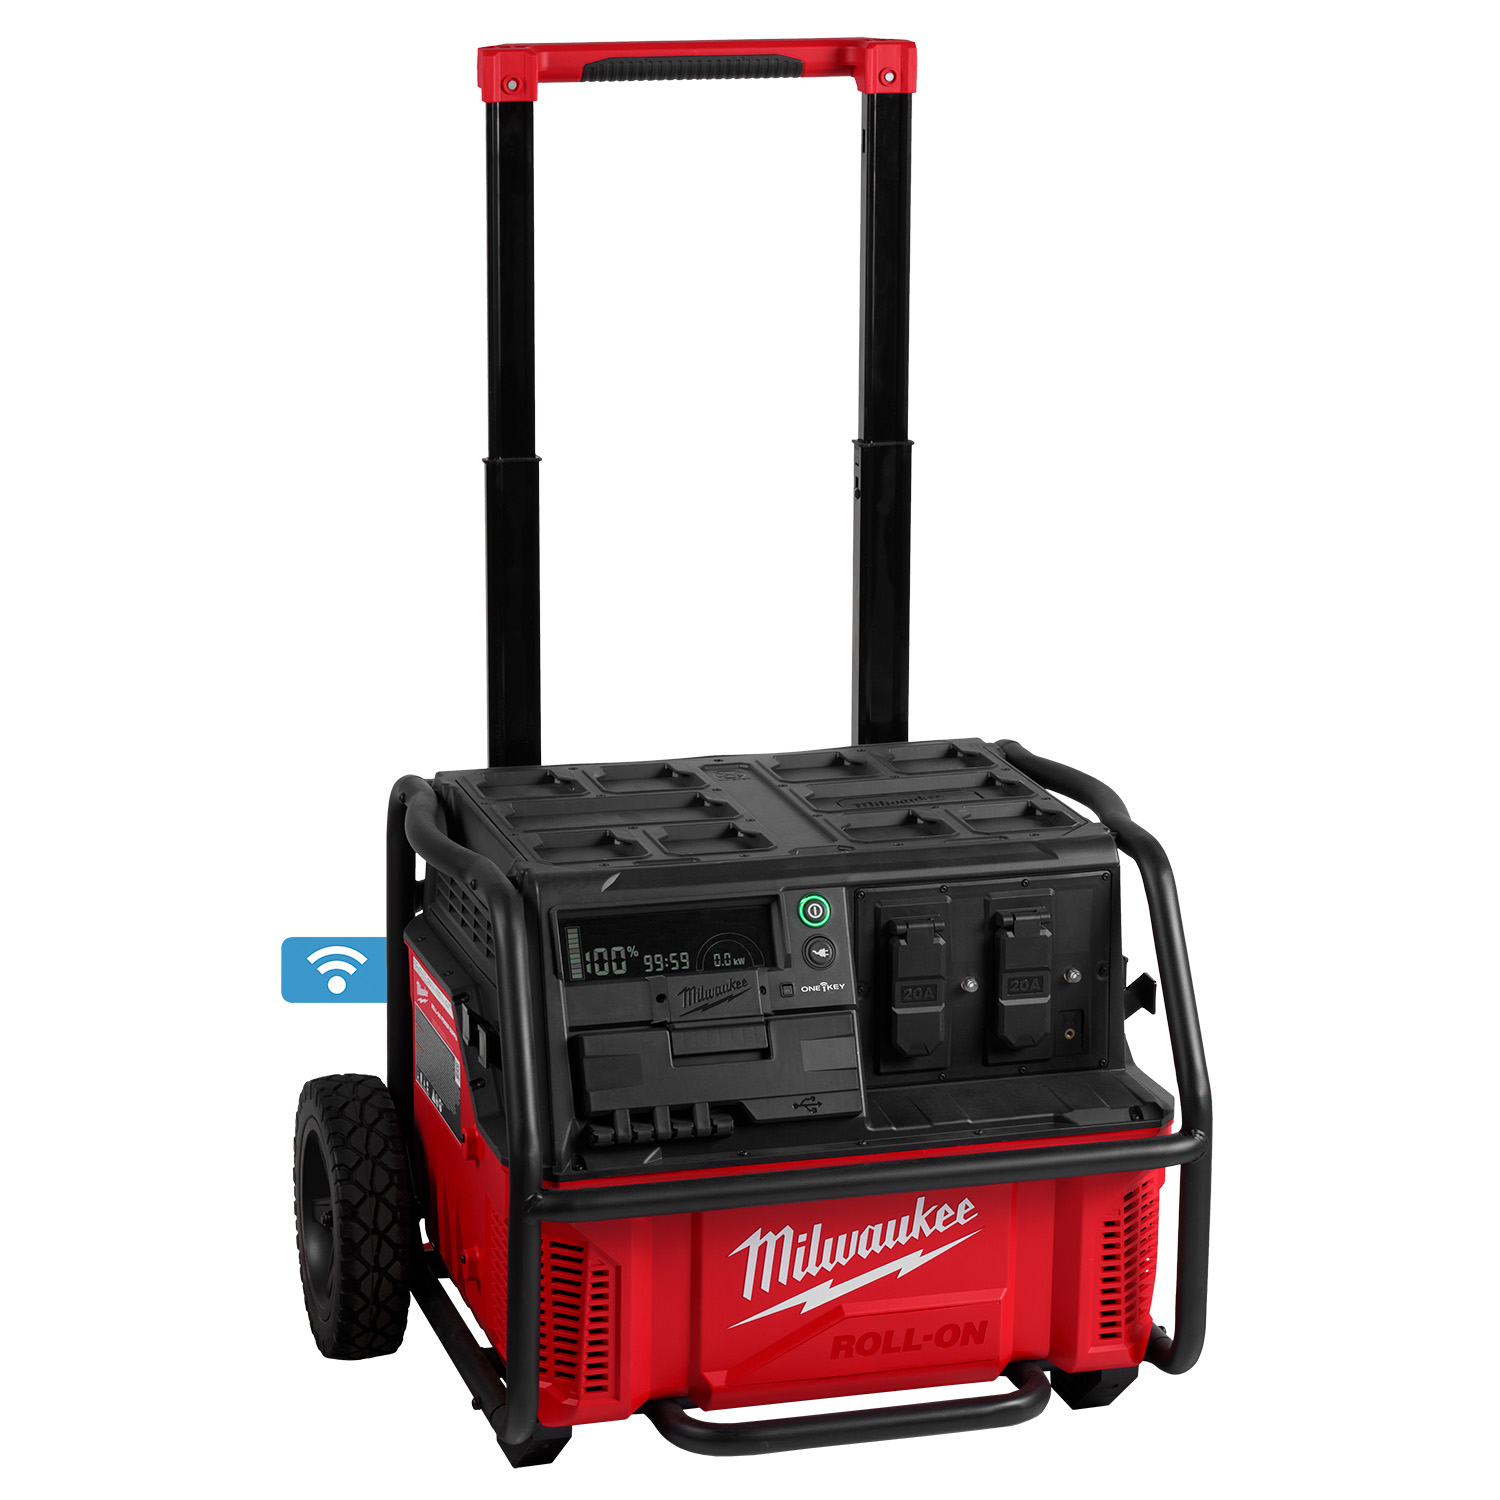 Milwaukee 3300R ROLL-ON 7200W/3600W 2.5kWh Power Supply from GME Supply